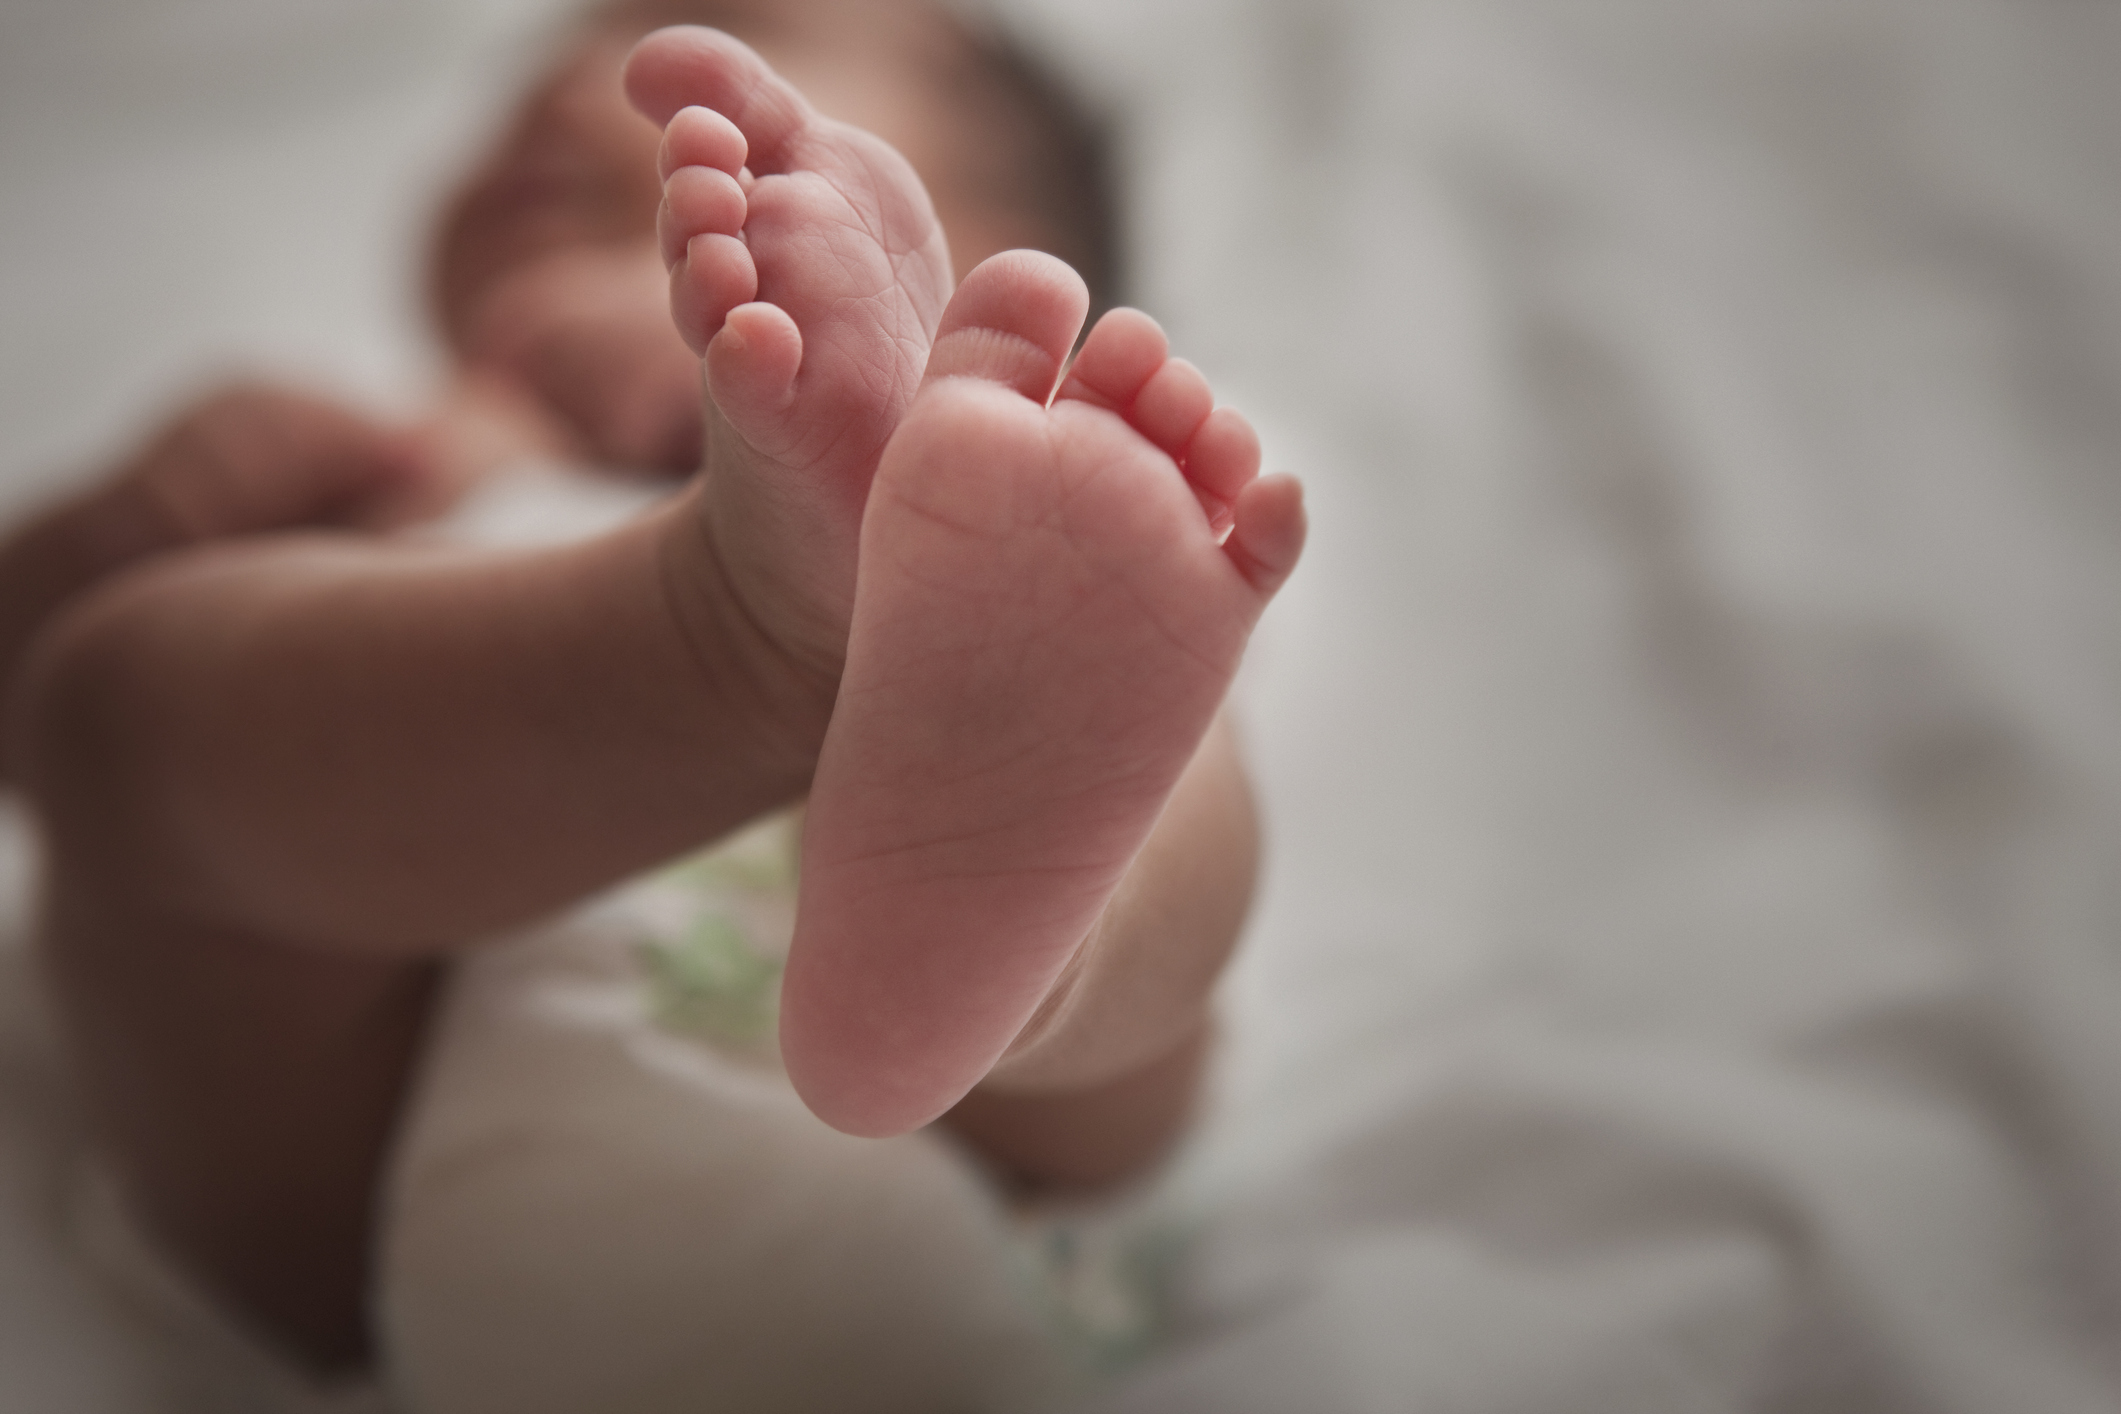 Babies Who Survived Abortions Left To Die State Health Department Report Suggests